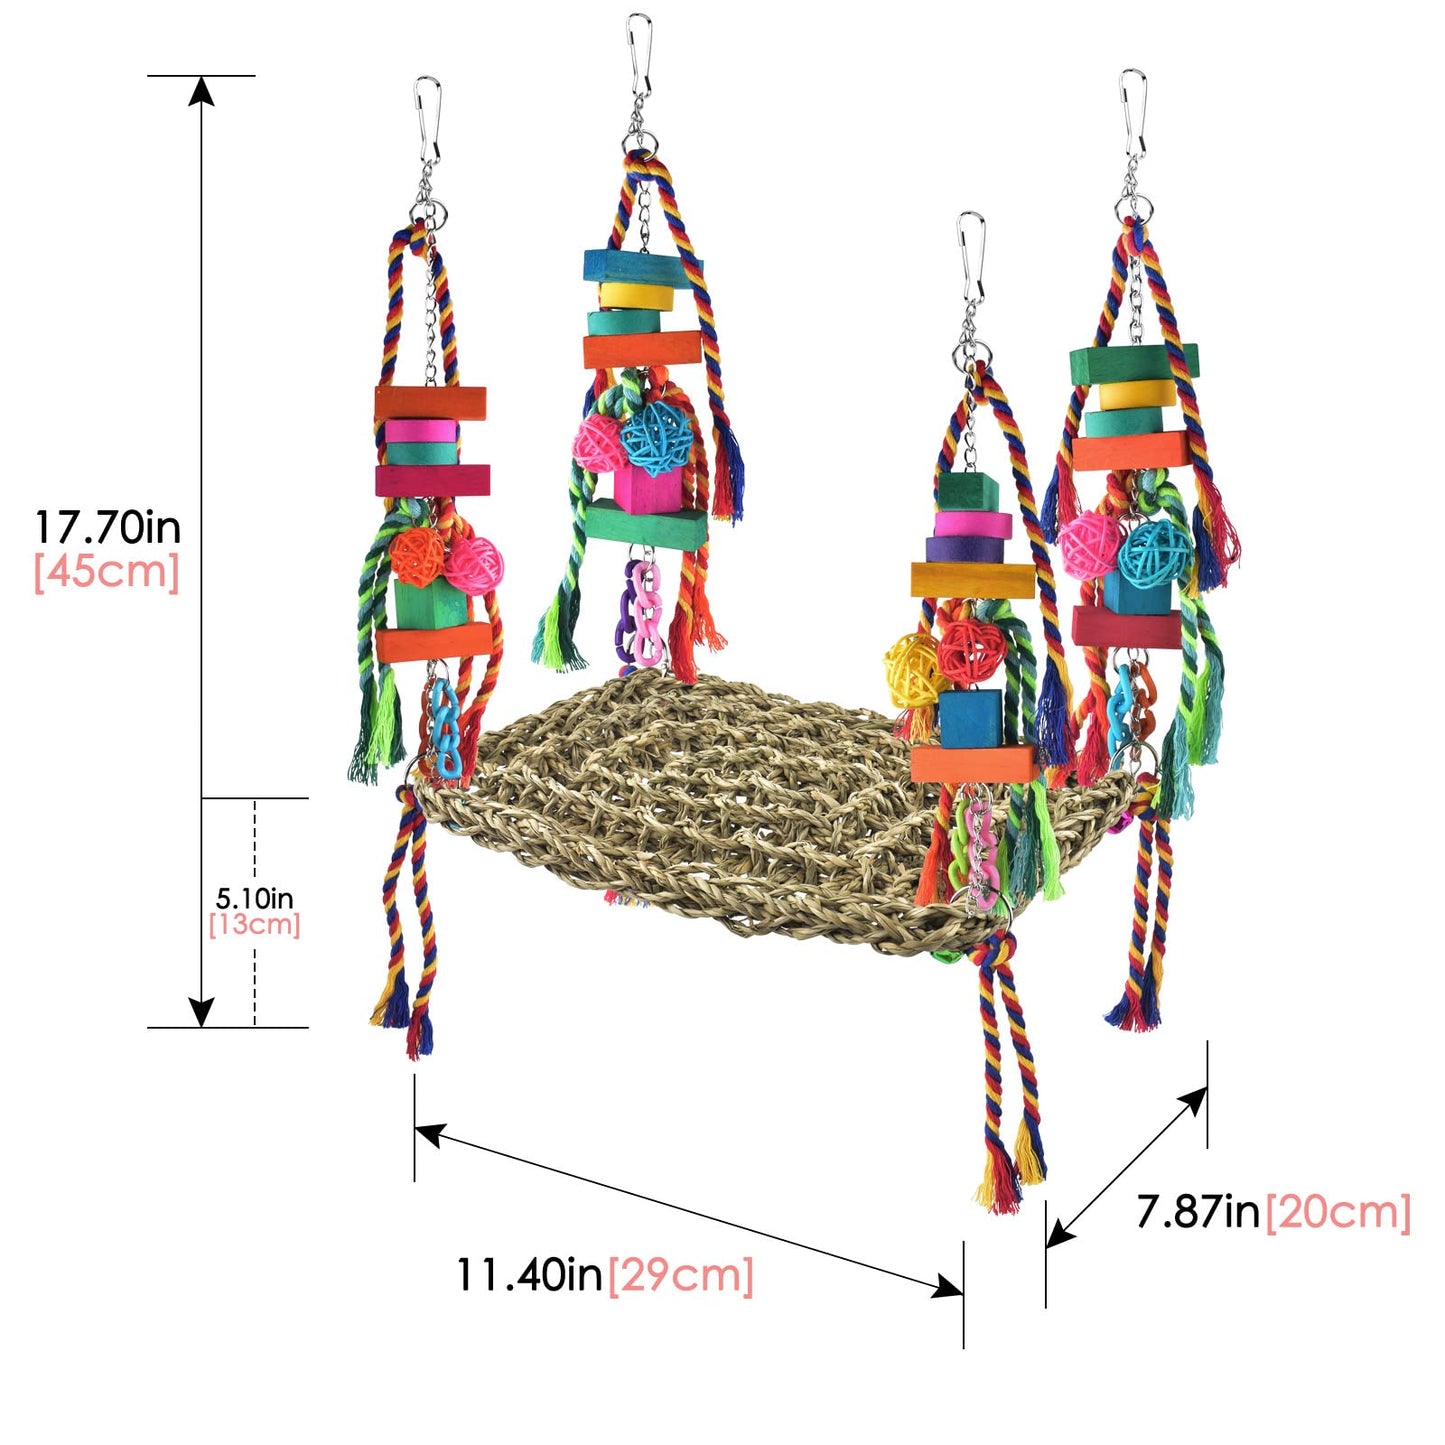 KATUMO Bird Toys, Bird Foraging Wall Toy Large Size Seagrass Woven Climbing Hammock Swing Mat with Colorful Chewing Toys for Lovebird, Parakeet, Budgie, Conure, Cockatiel, Small Birds